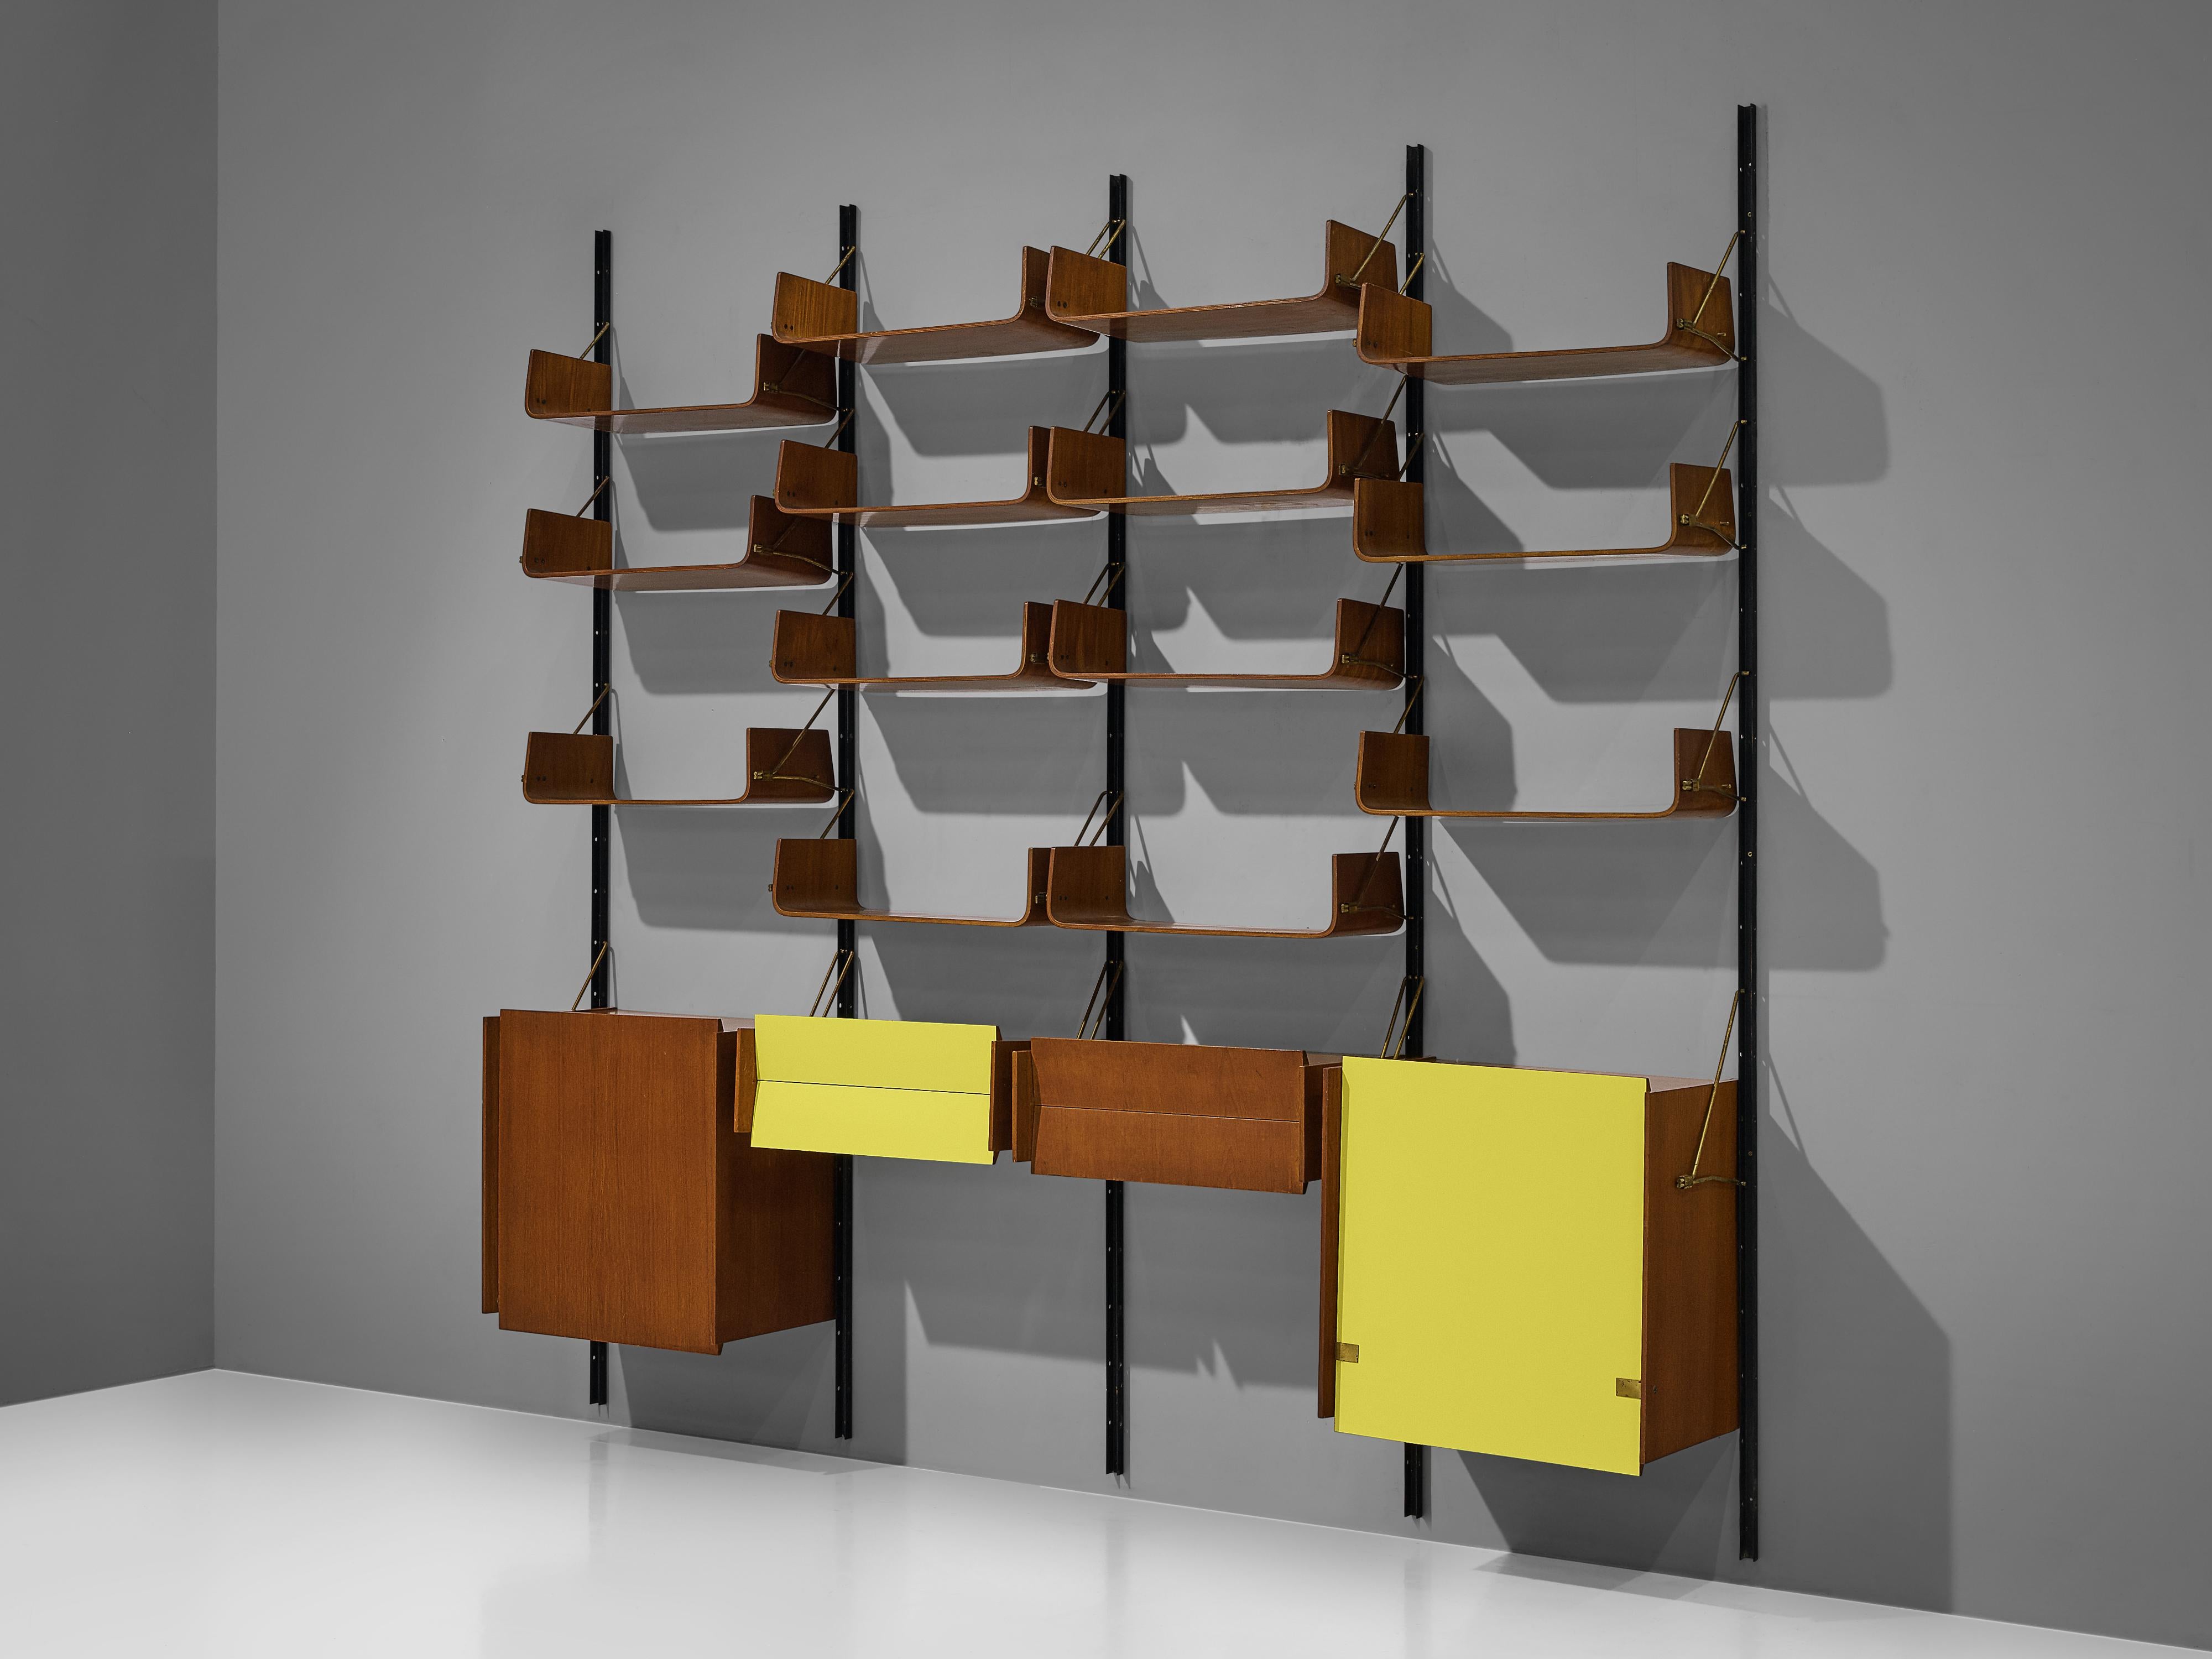 Wall unit, walnut, plywood, brass, lacquered metal, Italy, 1950s

Large Italian wall unit with four columns and multiple shelves and cabinets in different sizes. Both are adjustable at any height, making sure you can make your own personal